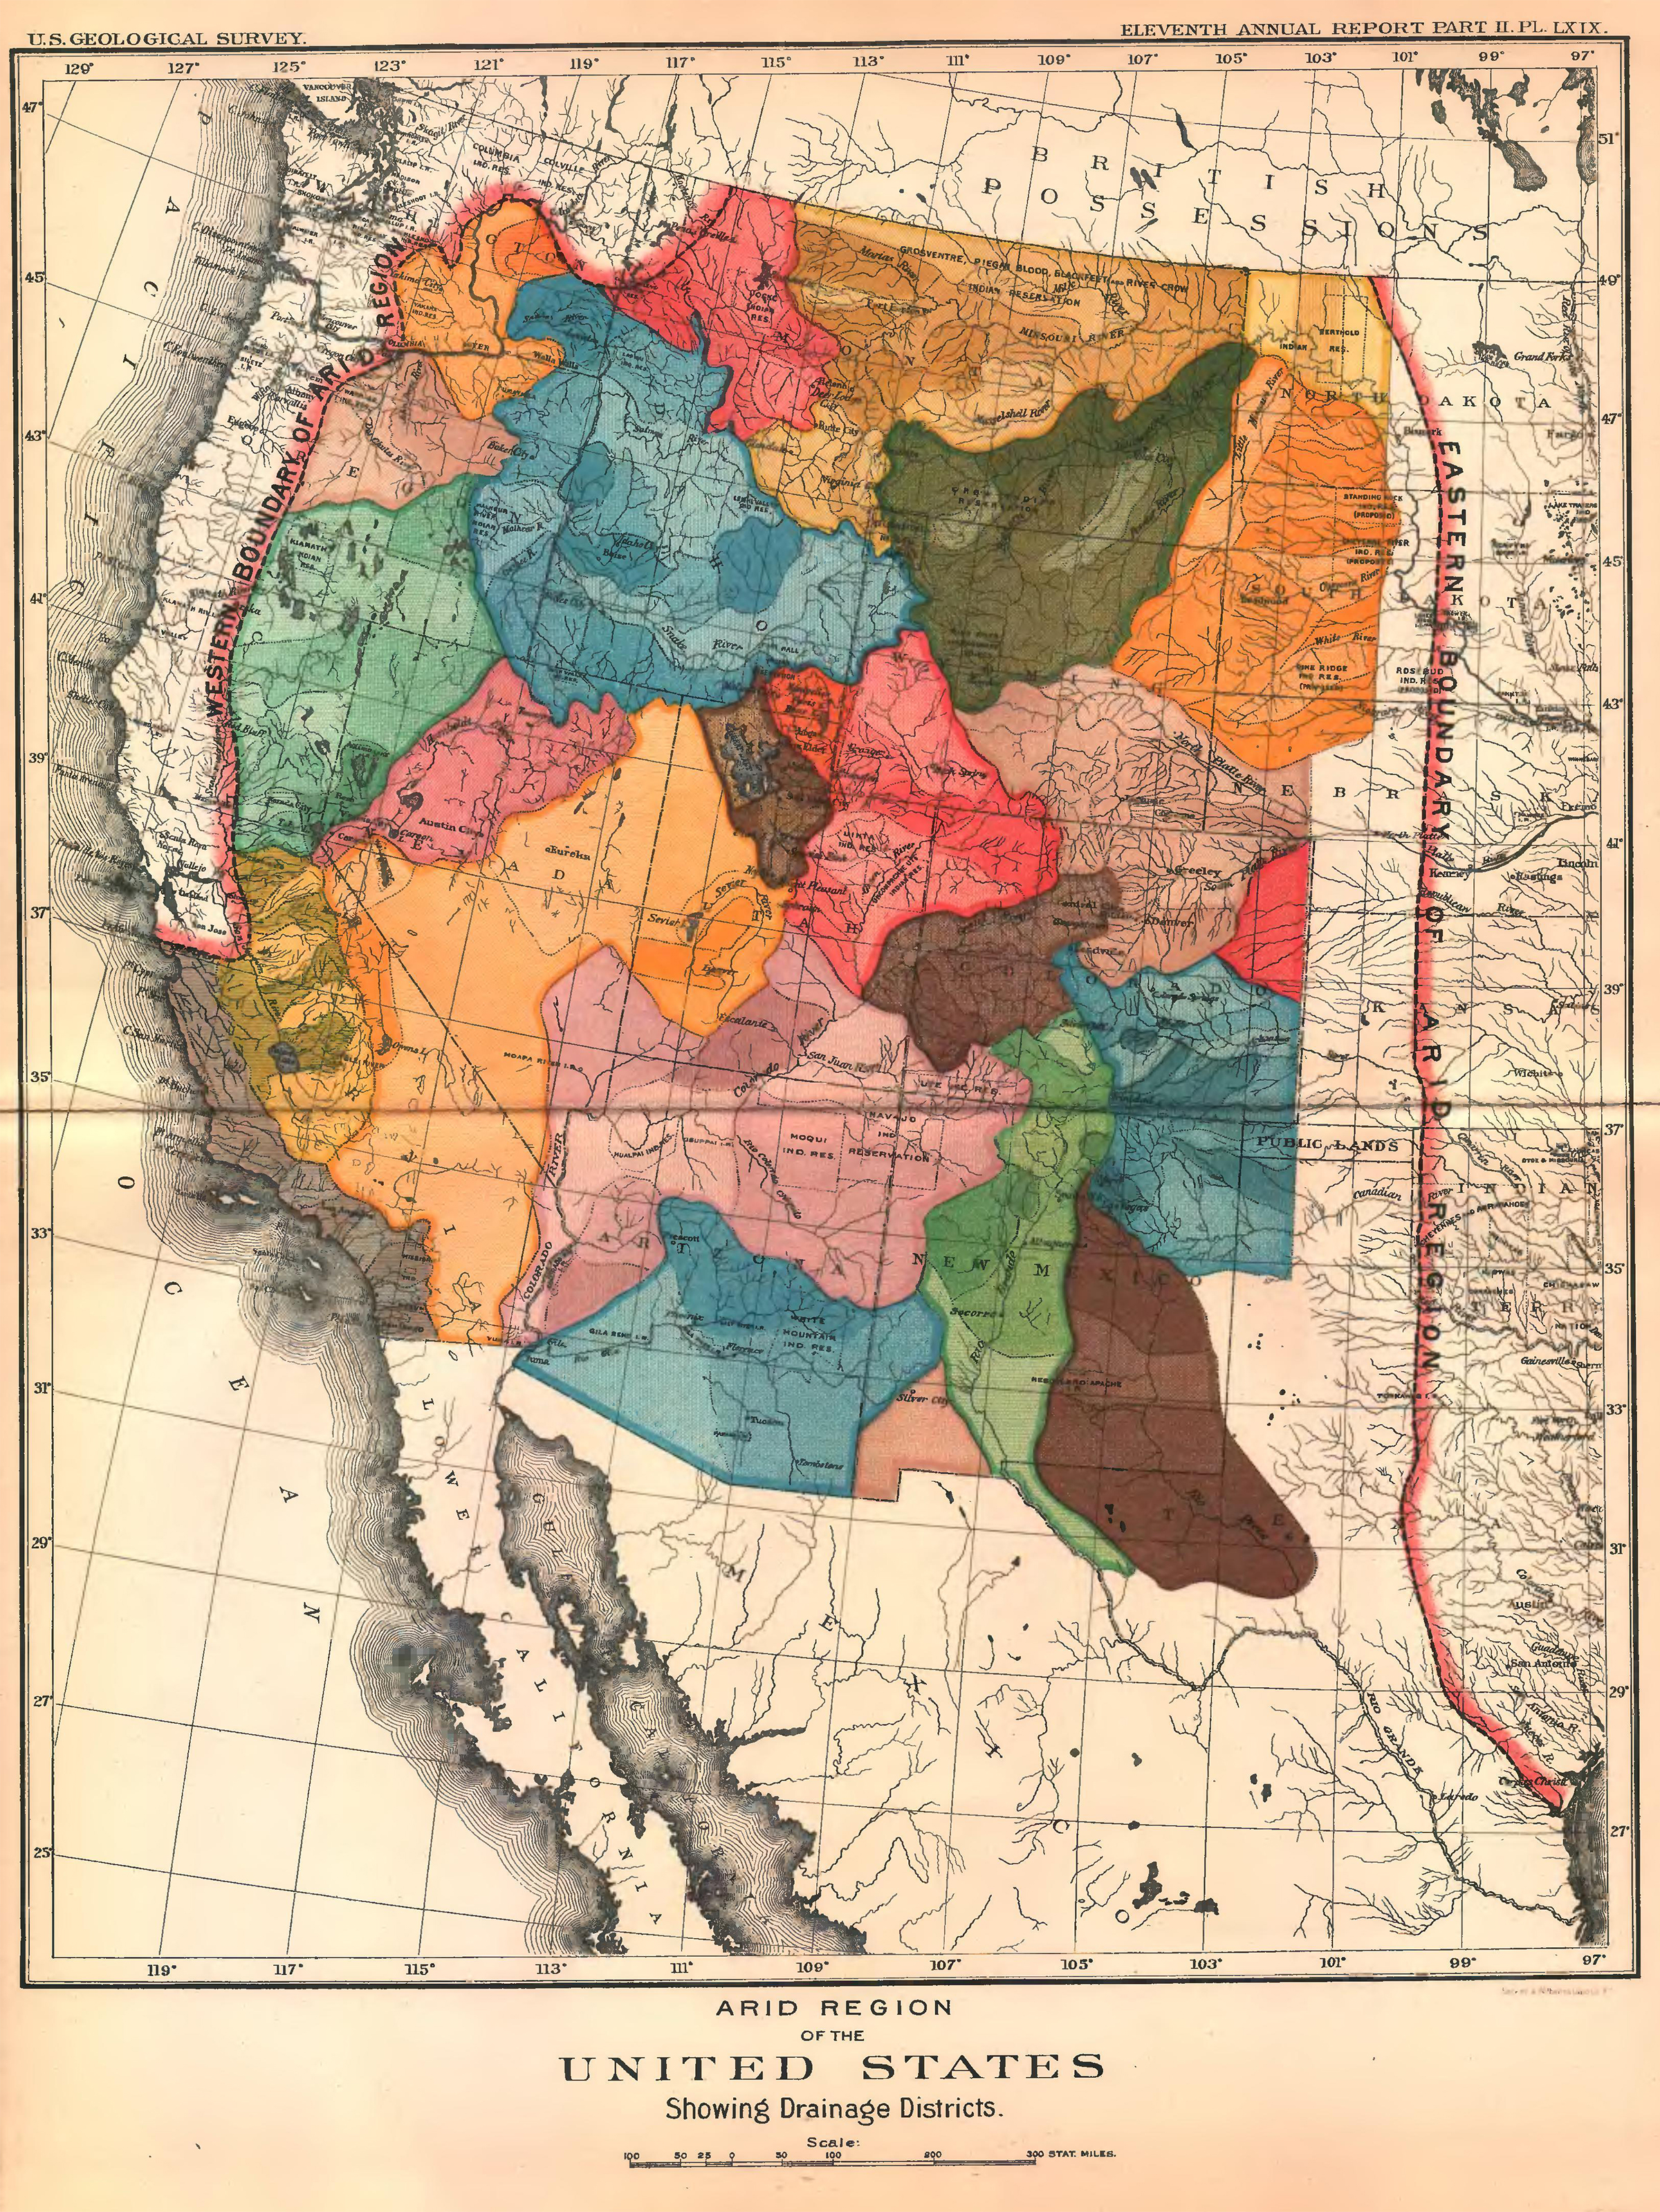 John Wesley Powell proposed map